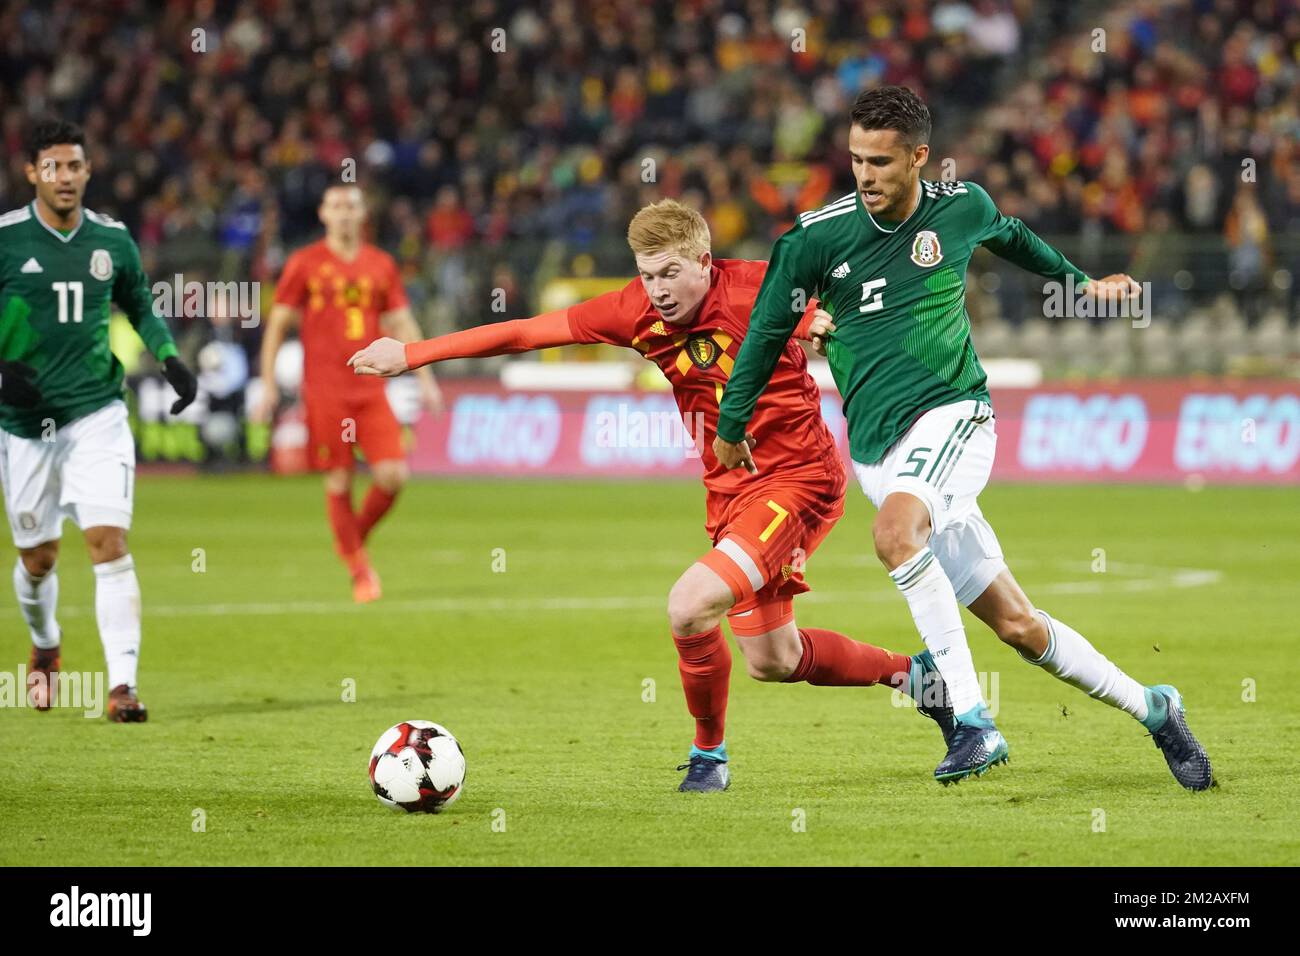 Belgium's Kevin De Bruyne and Mexico's Diego Reyes fight for the ball during a friendly soccer game between Belgian national team Red Devils and Mexico, Friday 10 November 2017, in Brussels. BELGA PHOTO BRUNO FAHY Stock Photo